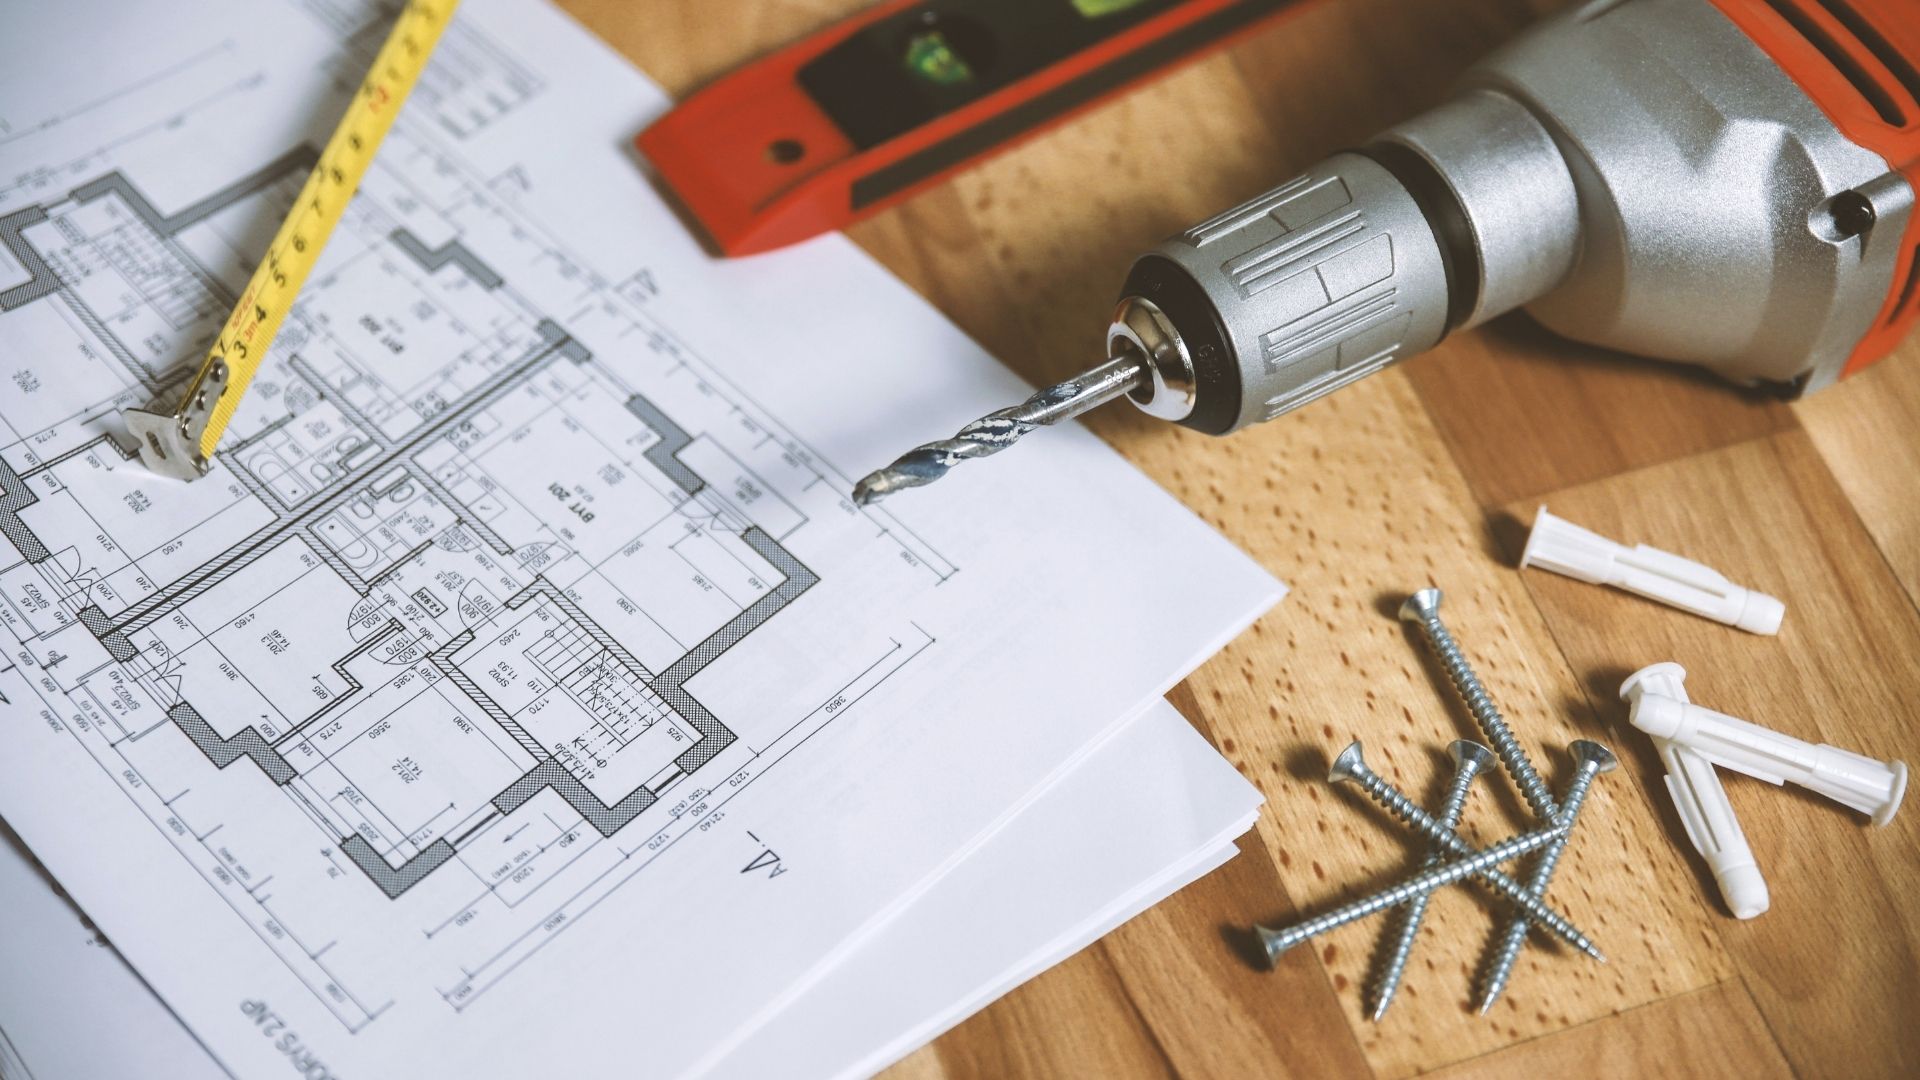 How to Plan a Home Addition - Blue Prints and Tools